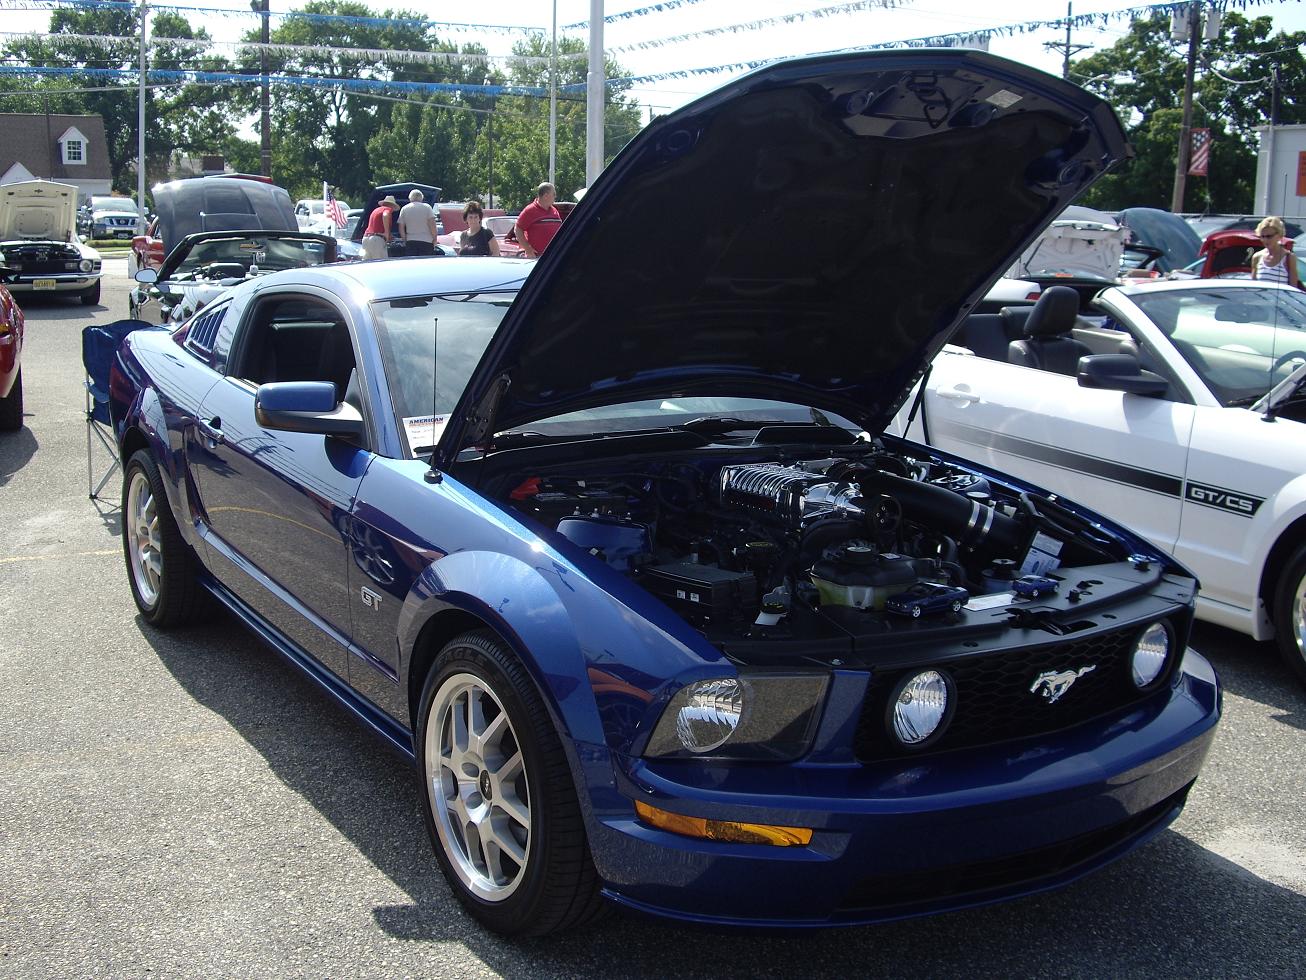 2008 Ford mustang gt quarter mile #9